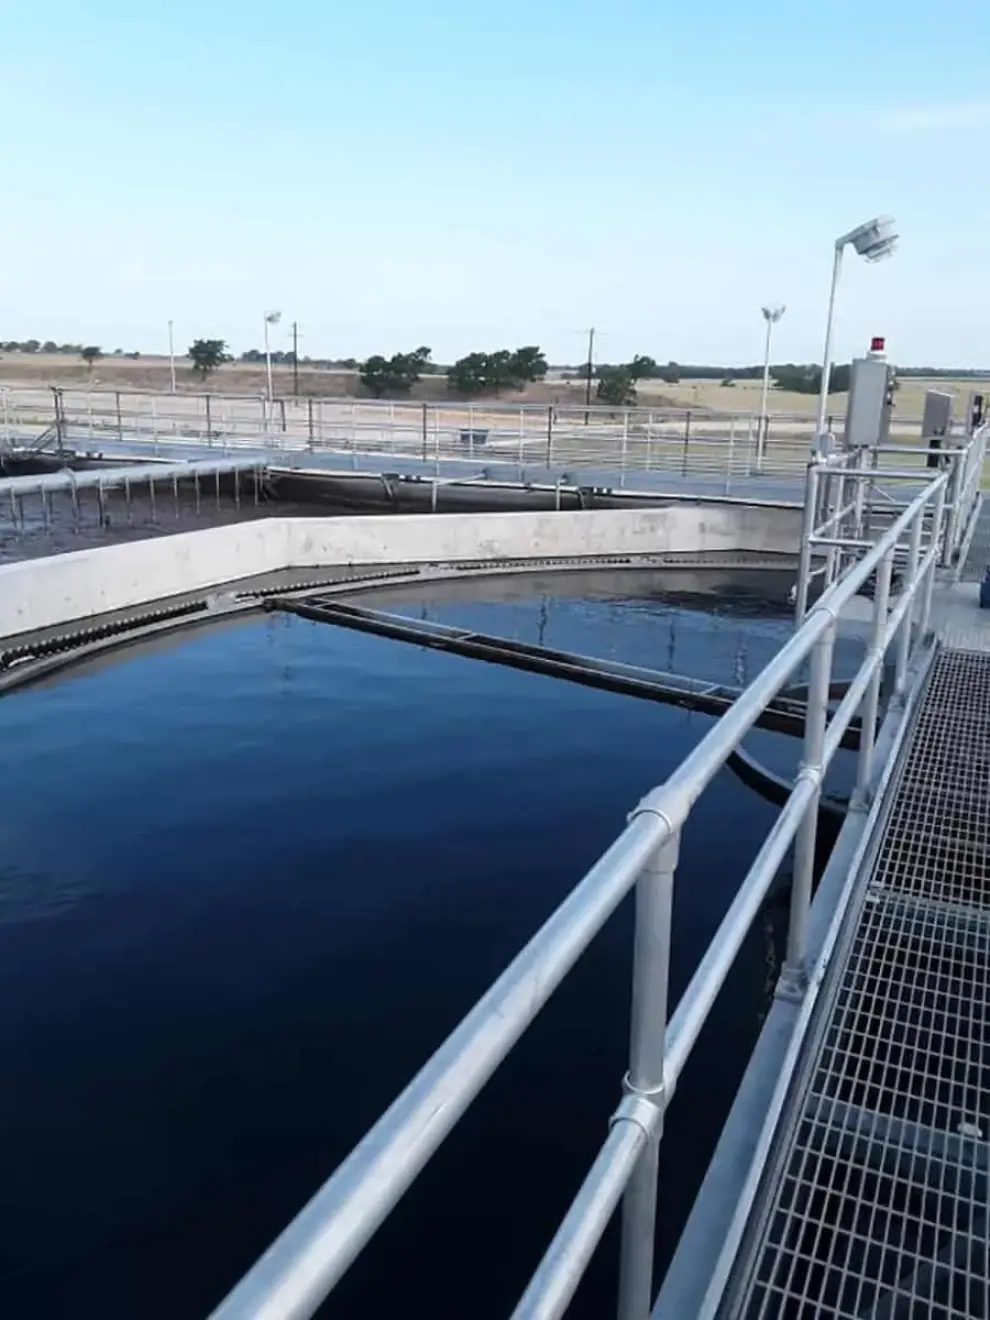 City of Jarrell Selects LAN to Prepare Alternatives Engineering Report for New Wastewater Treatment Plant